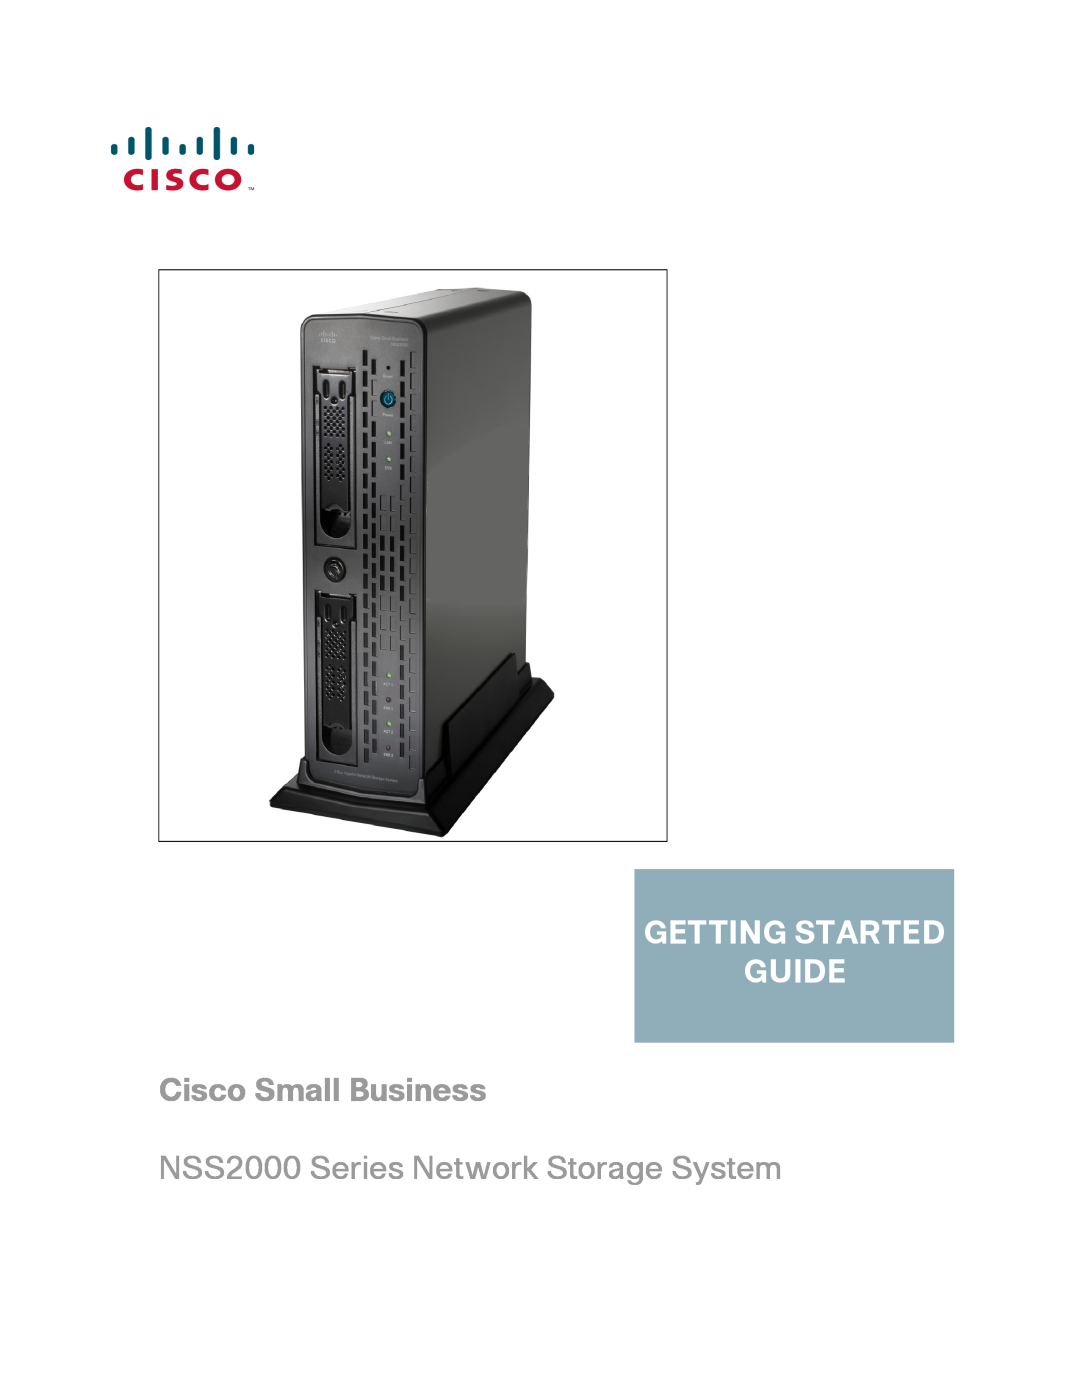 Cisco Systems manual Getting Started Guide, Cisco Small Business, NSS2000 Series Network Storage System 